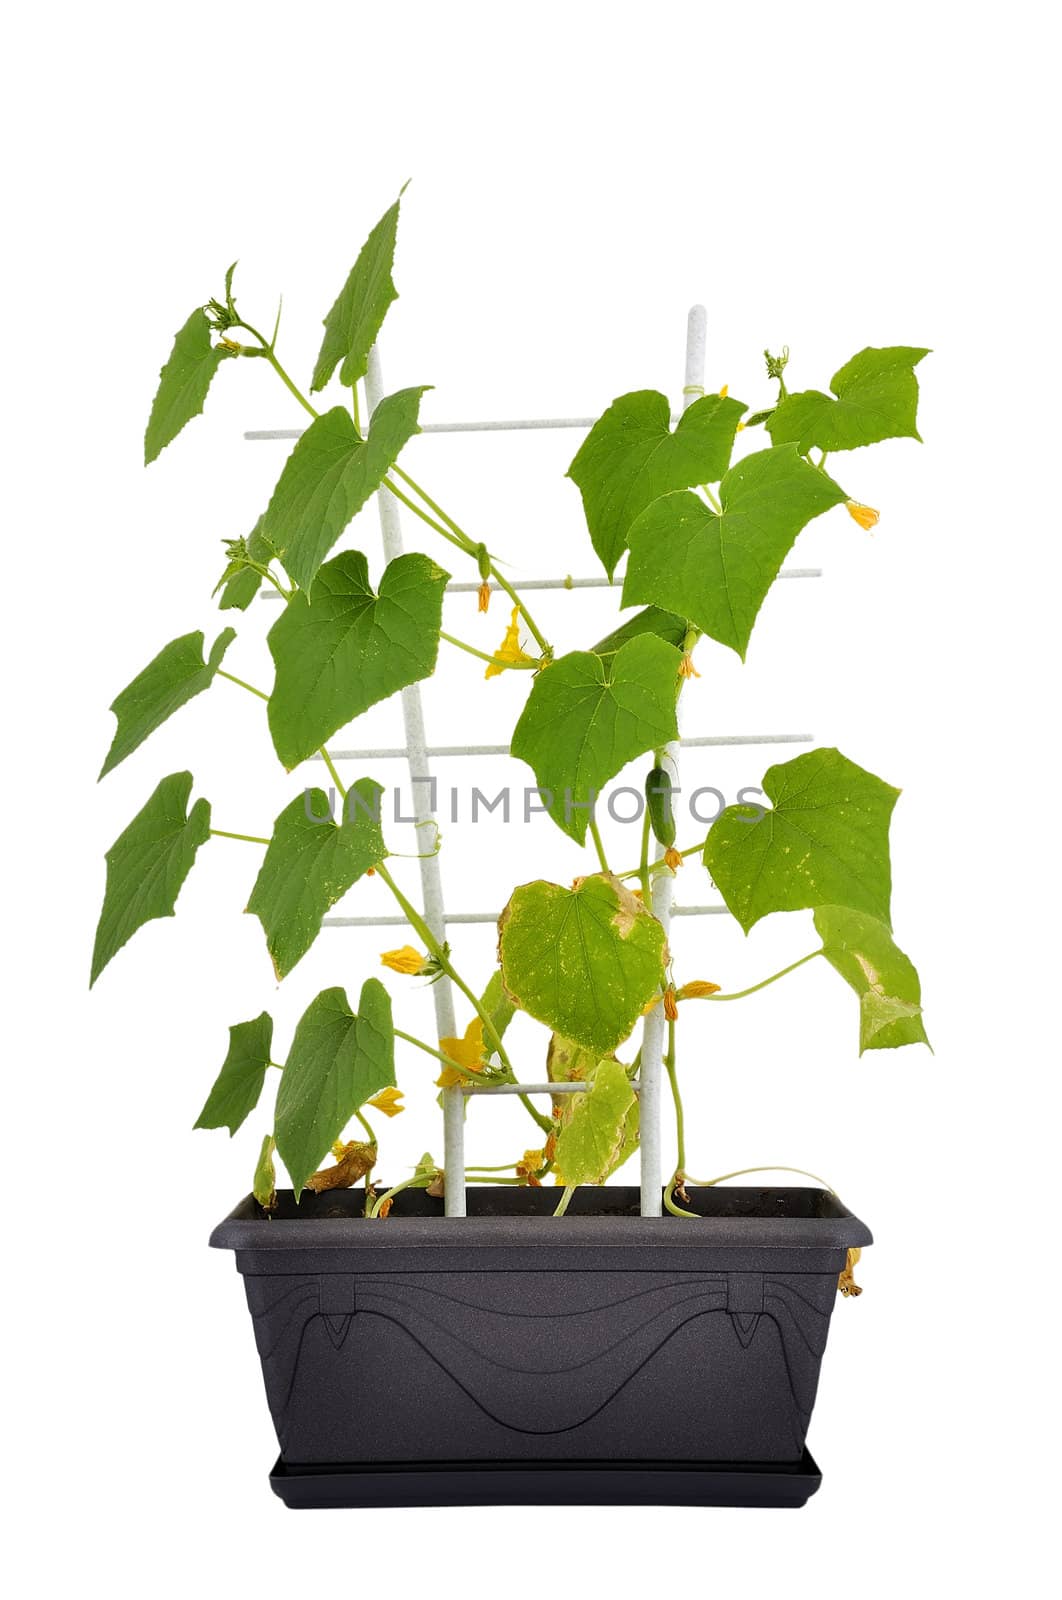 green cucumbers on white background